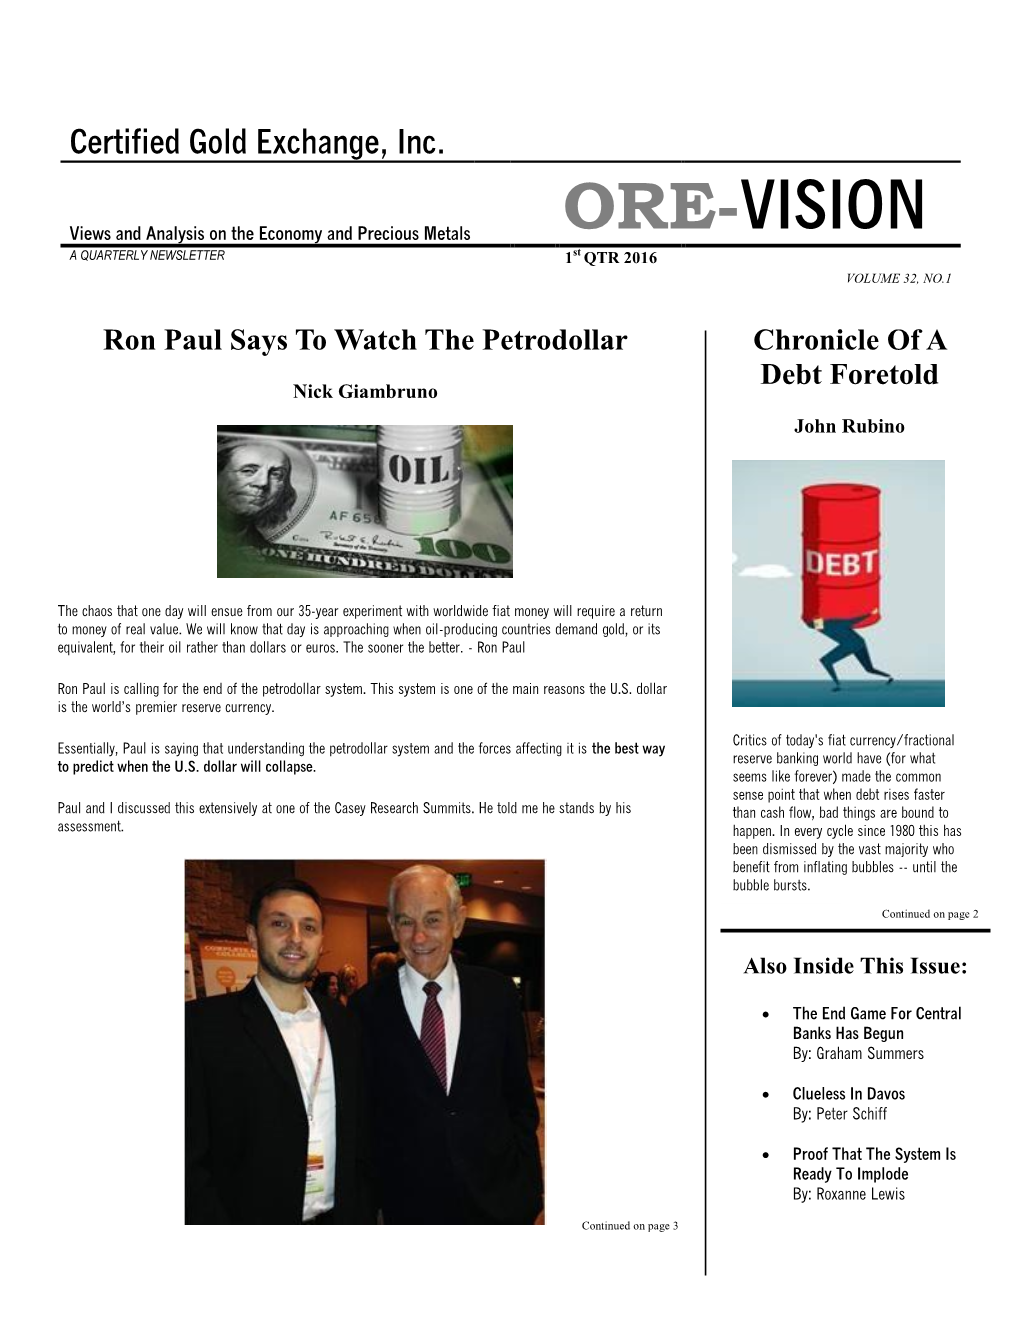 ORE-VISION a QUARTERLY NEWSLETTER 1St QTR 2016 VOLUME 32, NO.1 Ron Paul Says to Watch the Petrodollar Chronicle of a Debt Foretold Nick Giambruno John Rubino